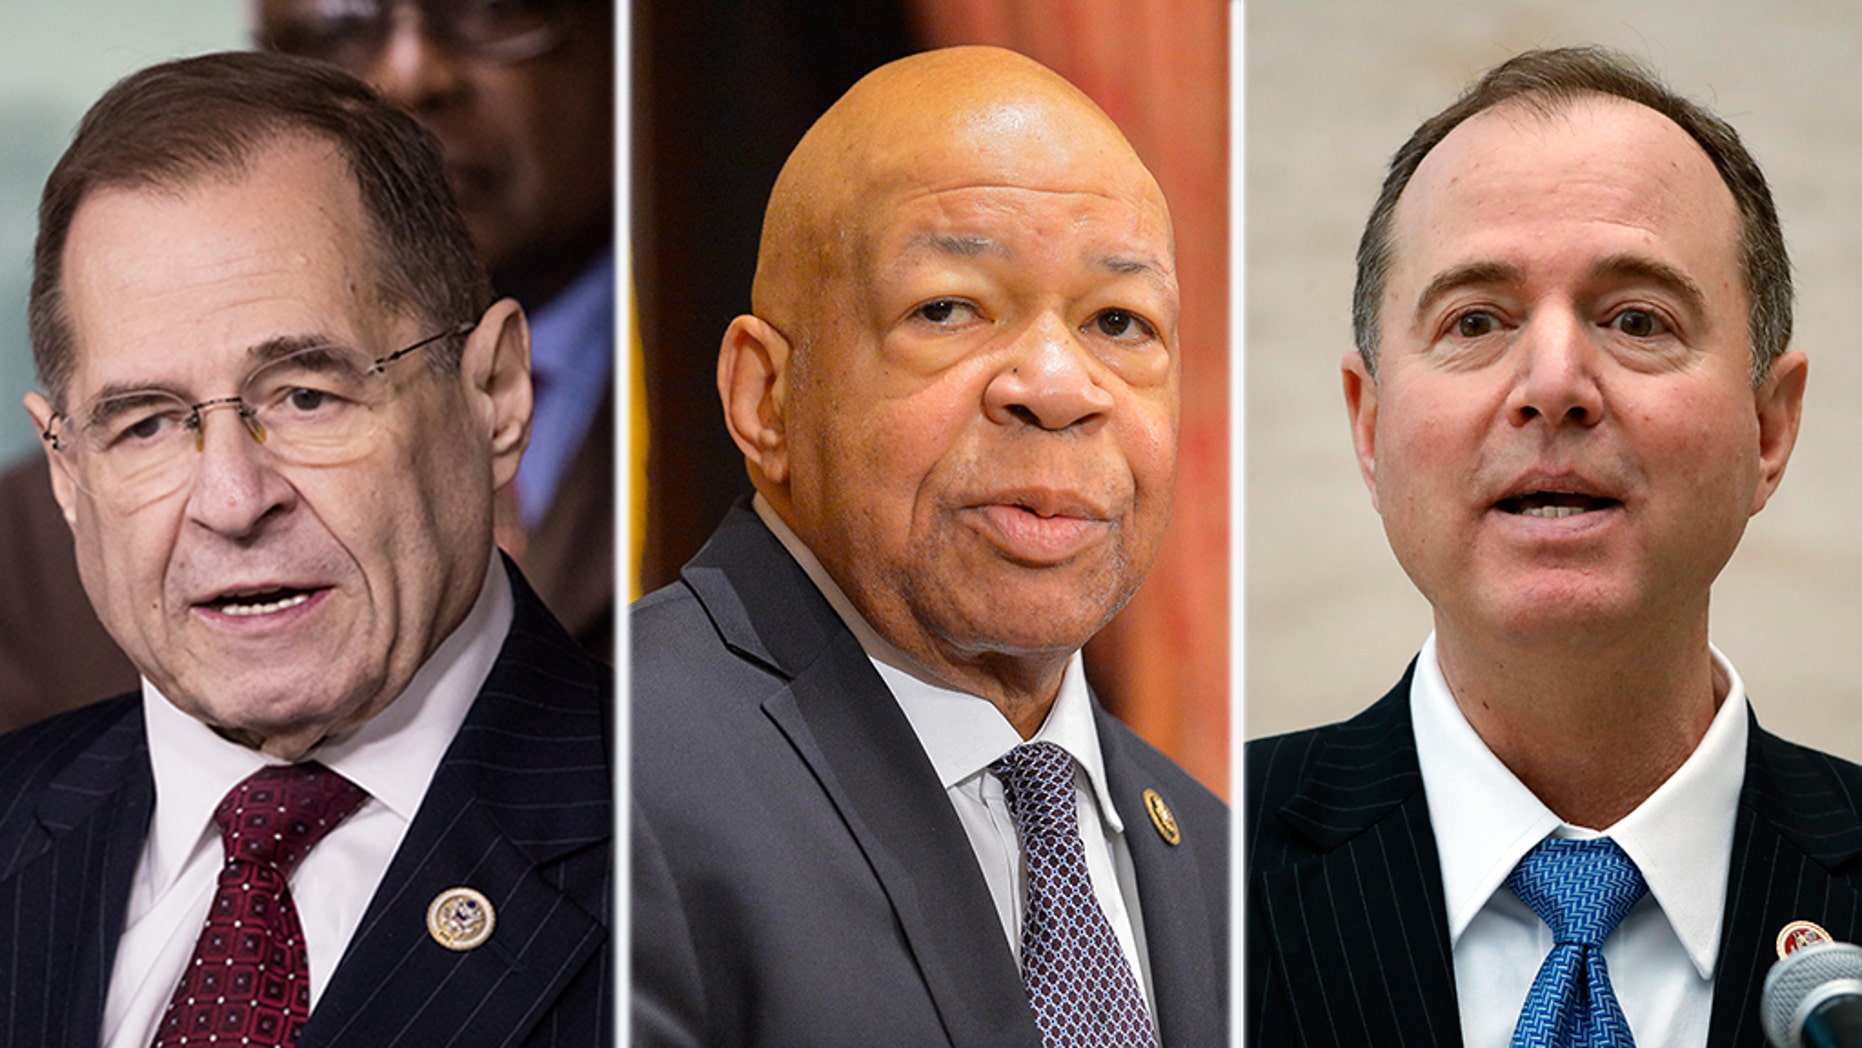 Rep. Jerry Nadler, the incoming chair of the House Judiciary Committee; Rep. Elijah Cummings, D-Md., the incoming chairman of the House Oversight Committee; and Rep. Adam Schiff, D-Calif., the incoming chairman of the House Intelligence Committee are readying to launch a slew of Trump administration investigations. (AP, Getty, Reuters)